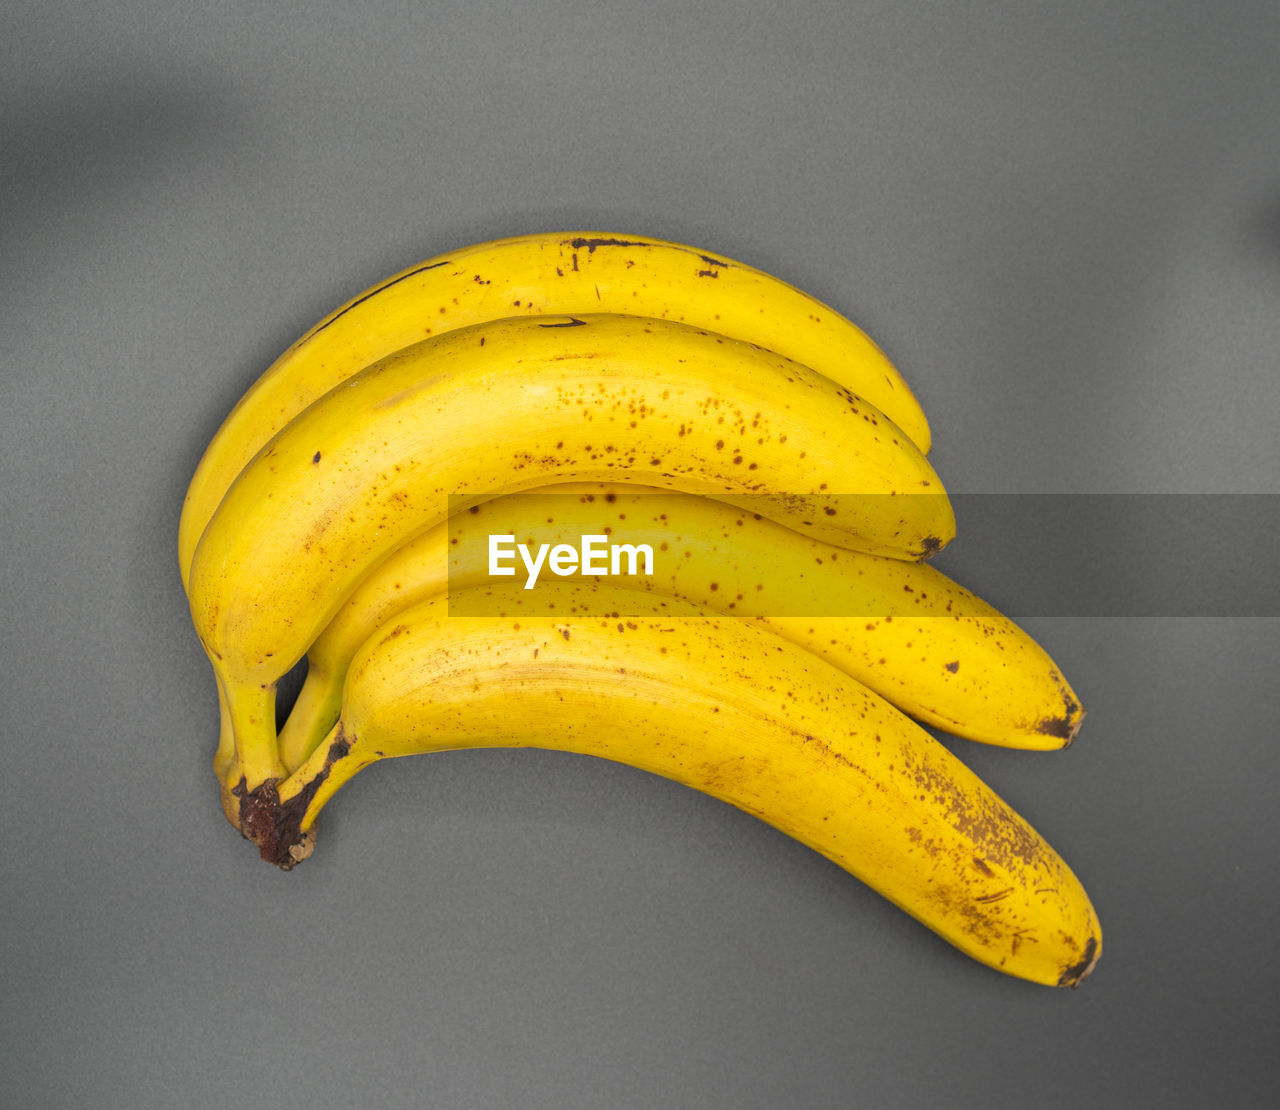 Some bananas from canary islans on a dark blackground